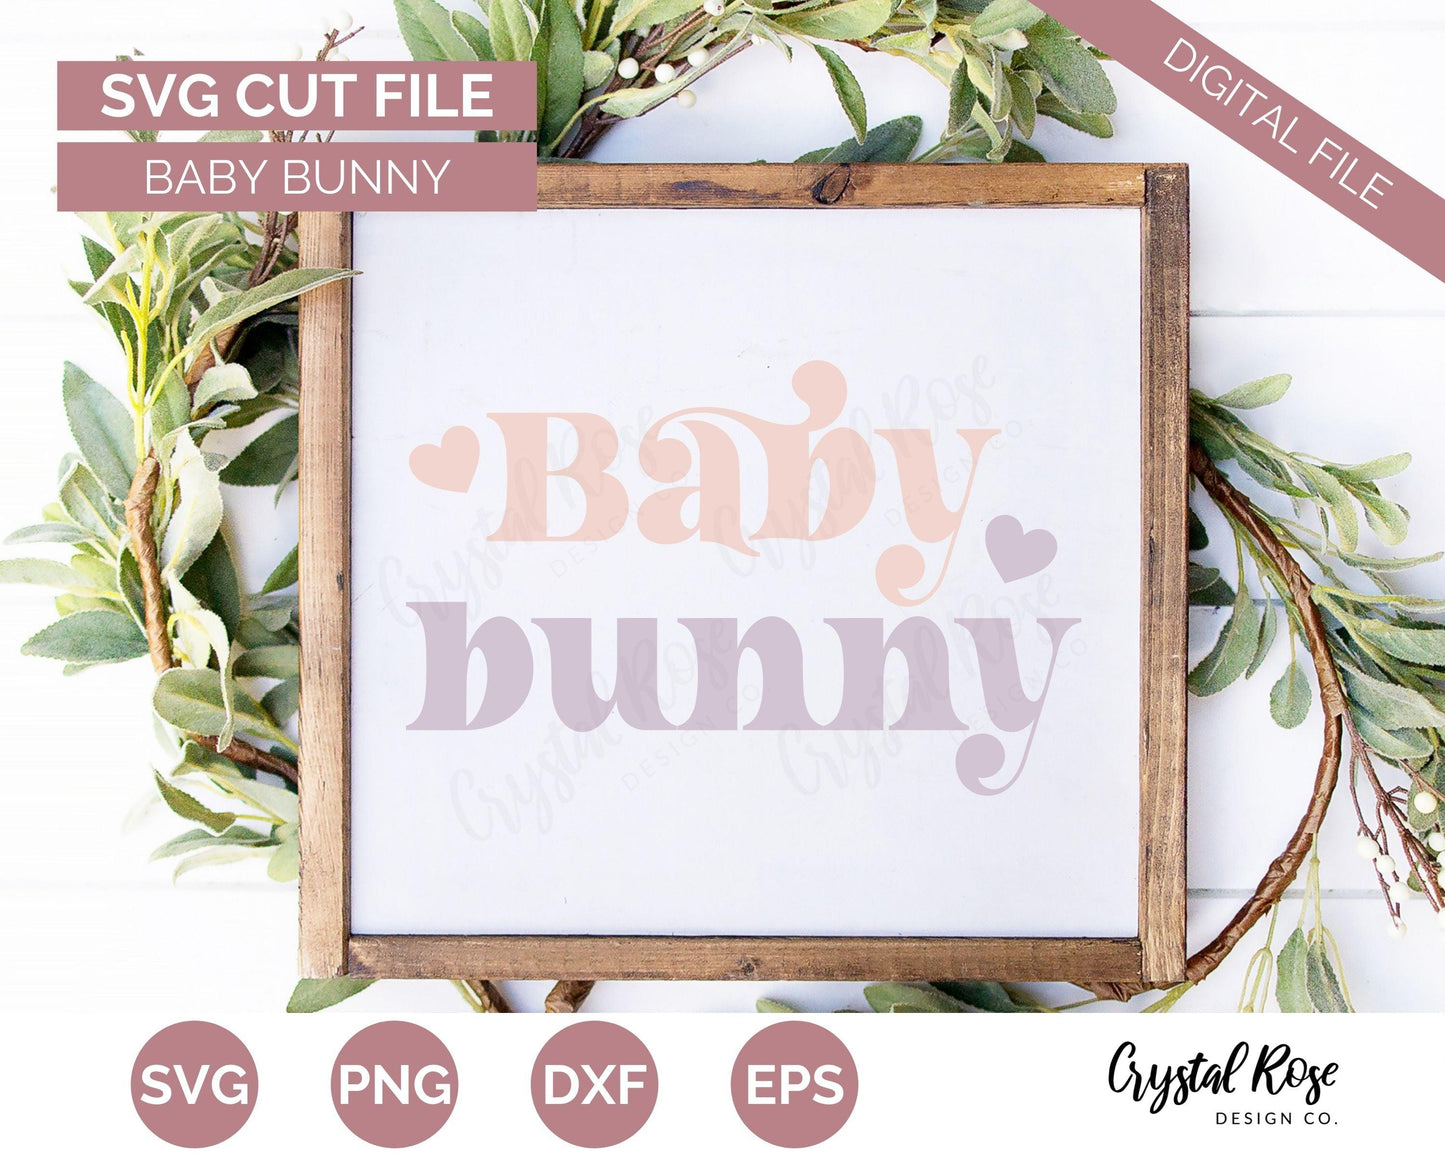 Baby Bunny SVG, Easter SVG, Digital Download, Cricut, Silhouette, Glowforge (includes svg/png/dxf/eps)